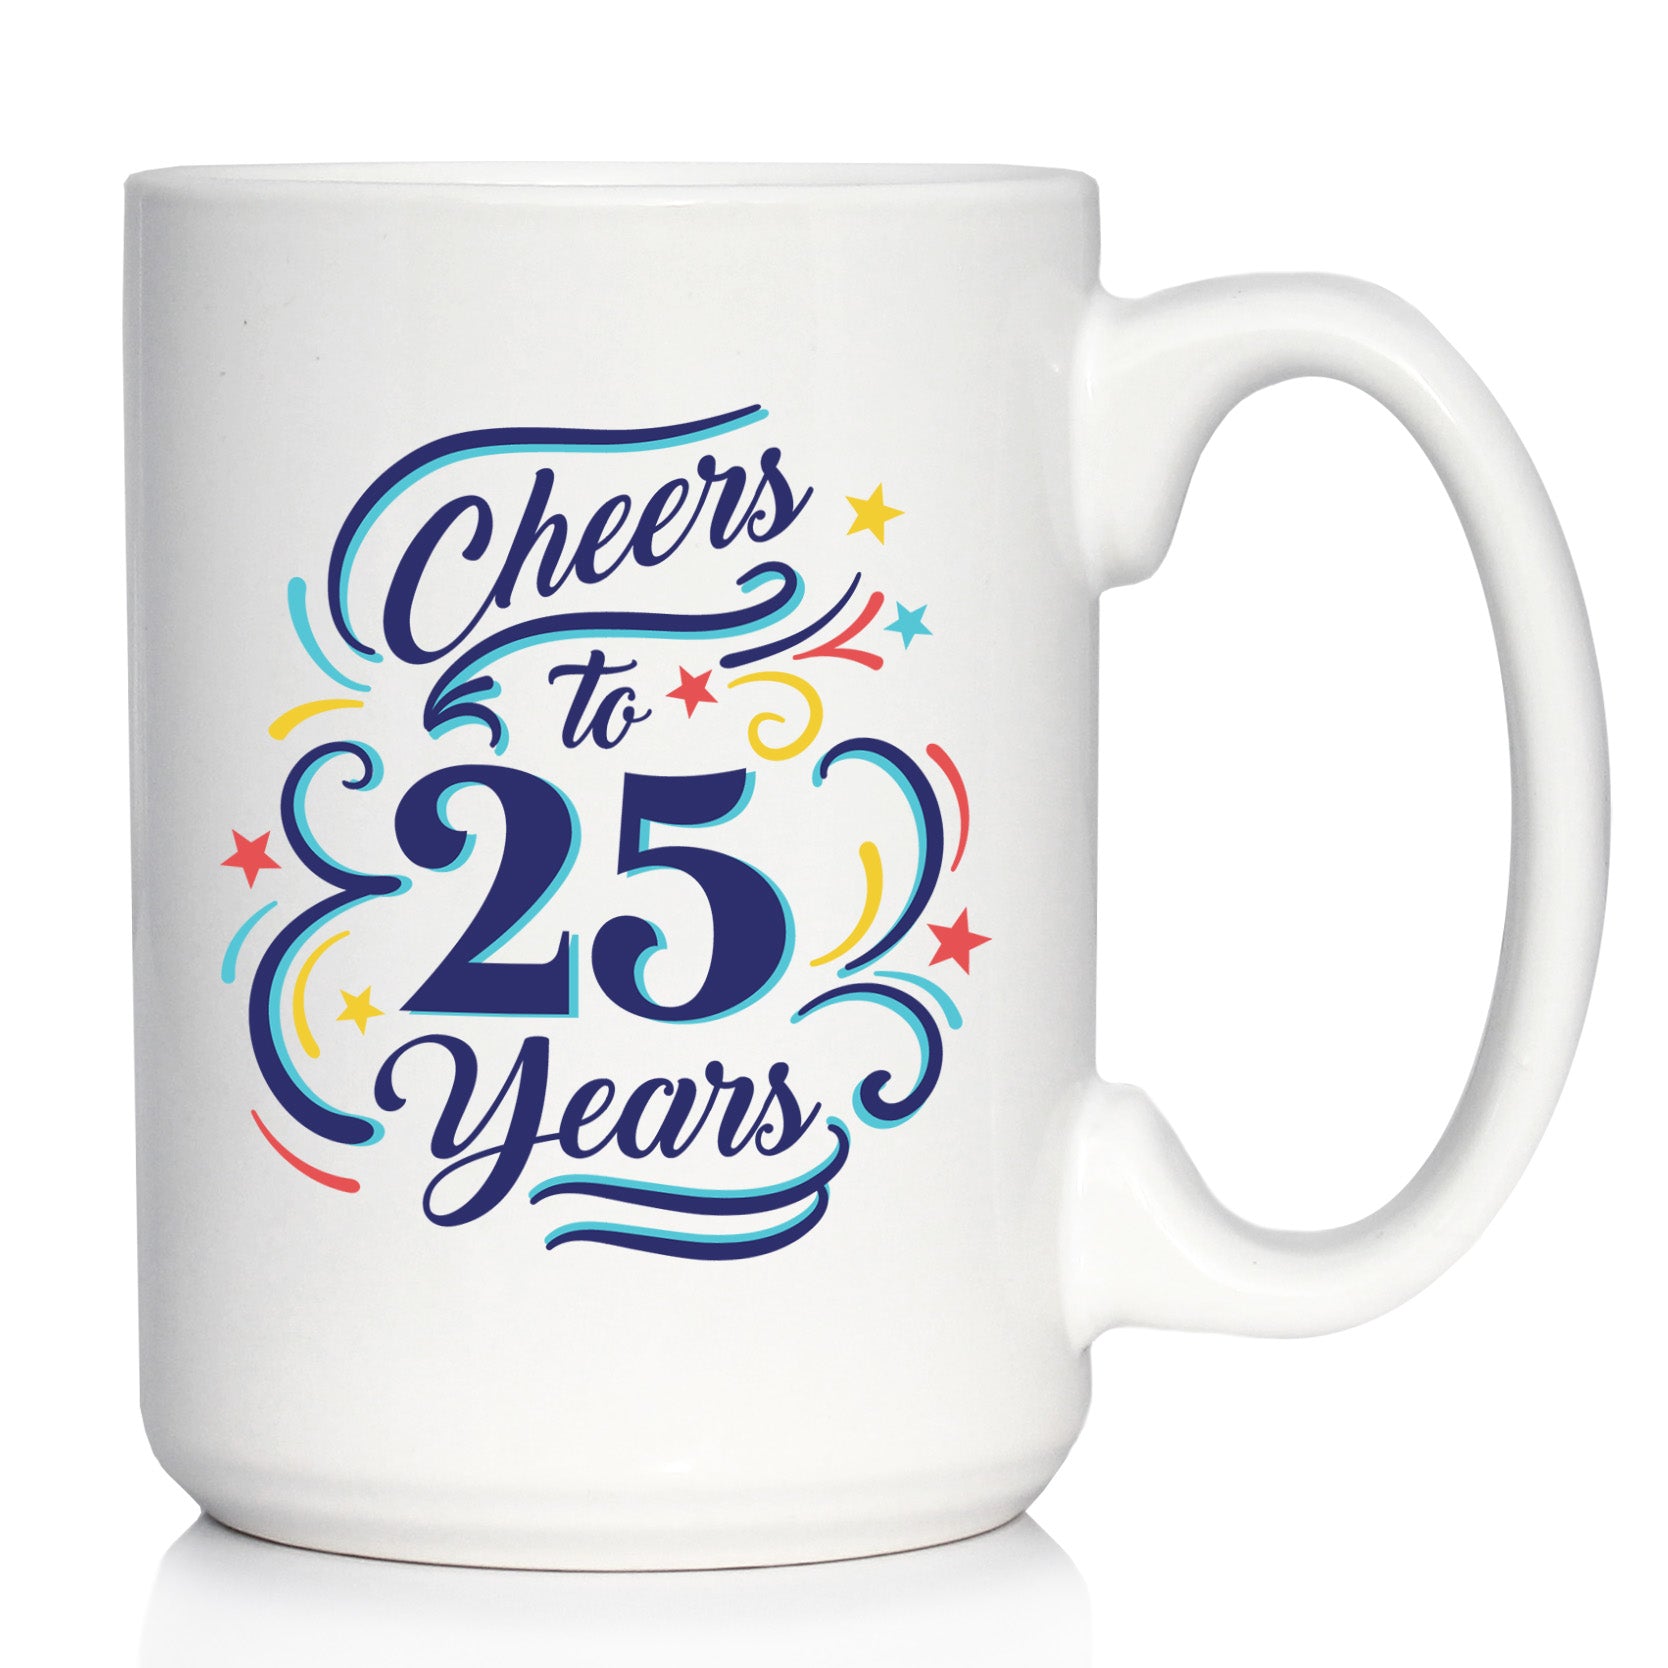 Cheers to 25 Years - Coffee Mug Gifts for Women & Men - 25th Anniversary Party Decor